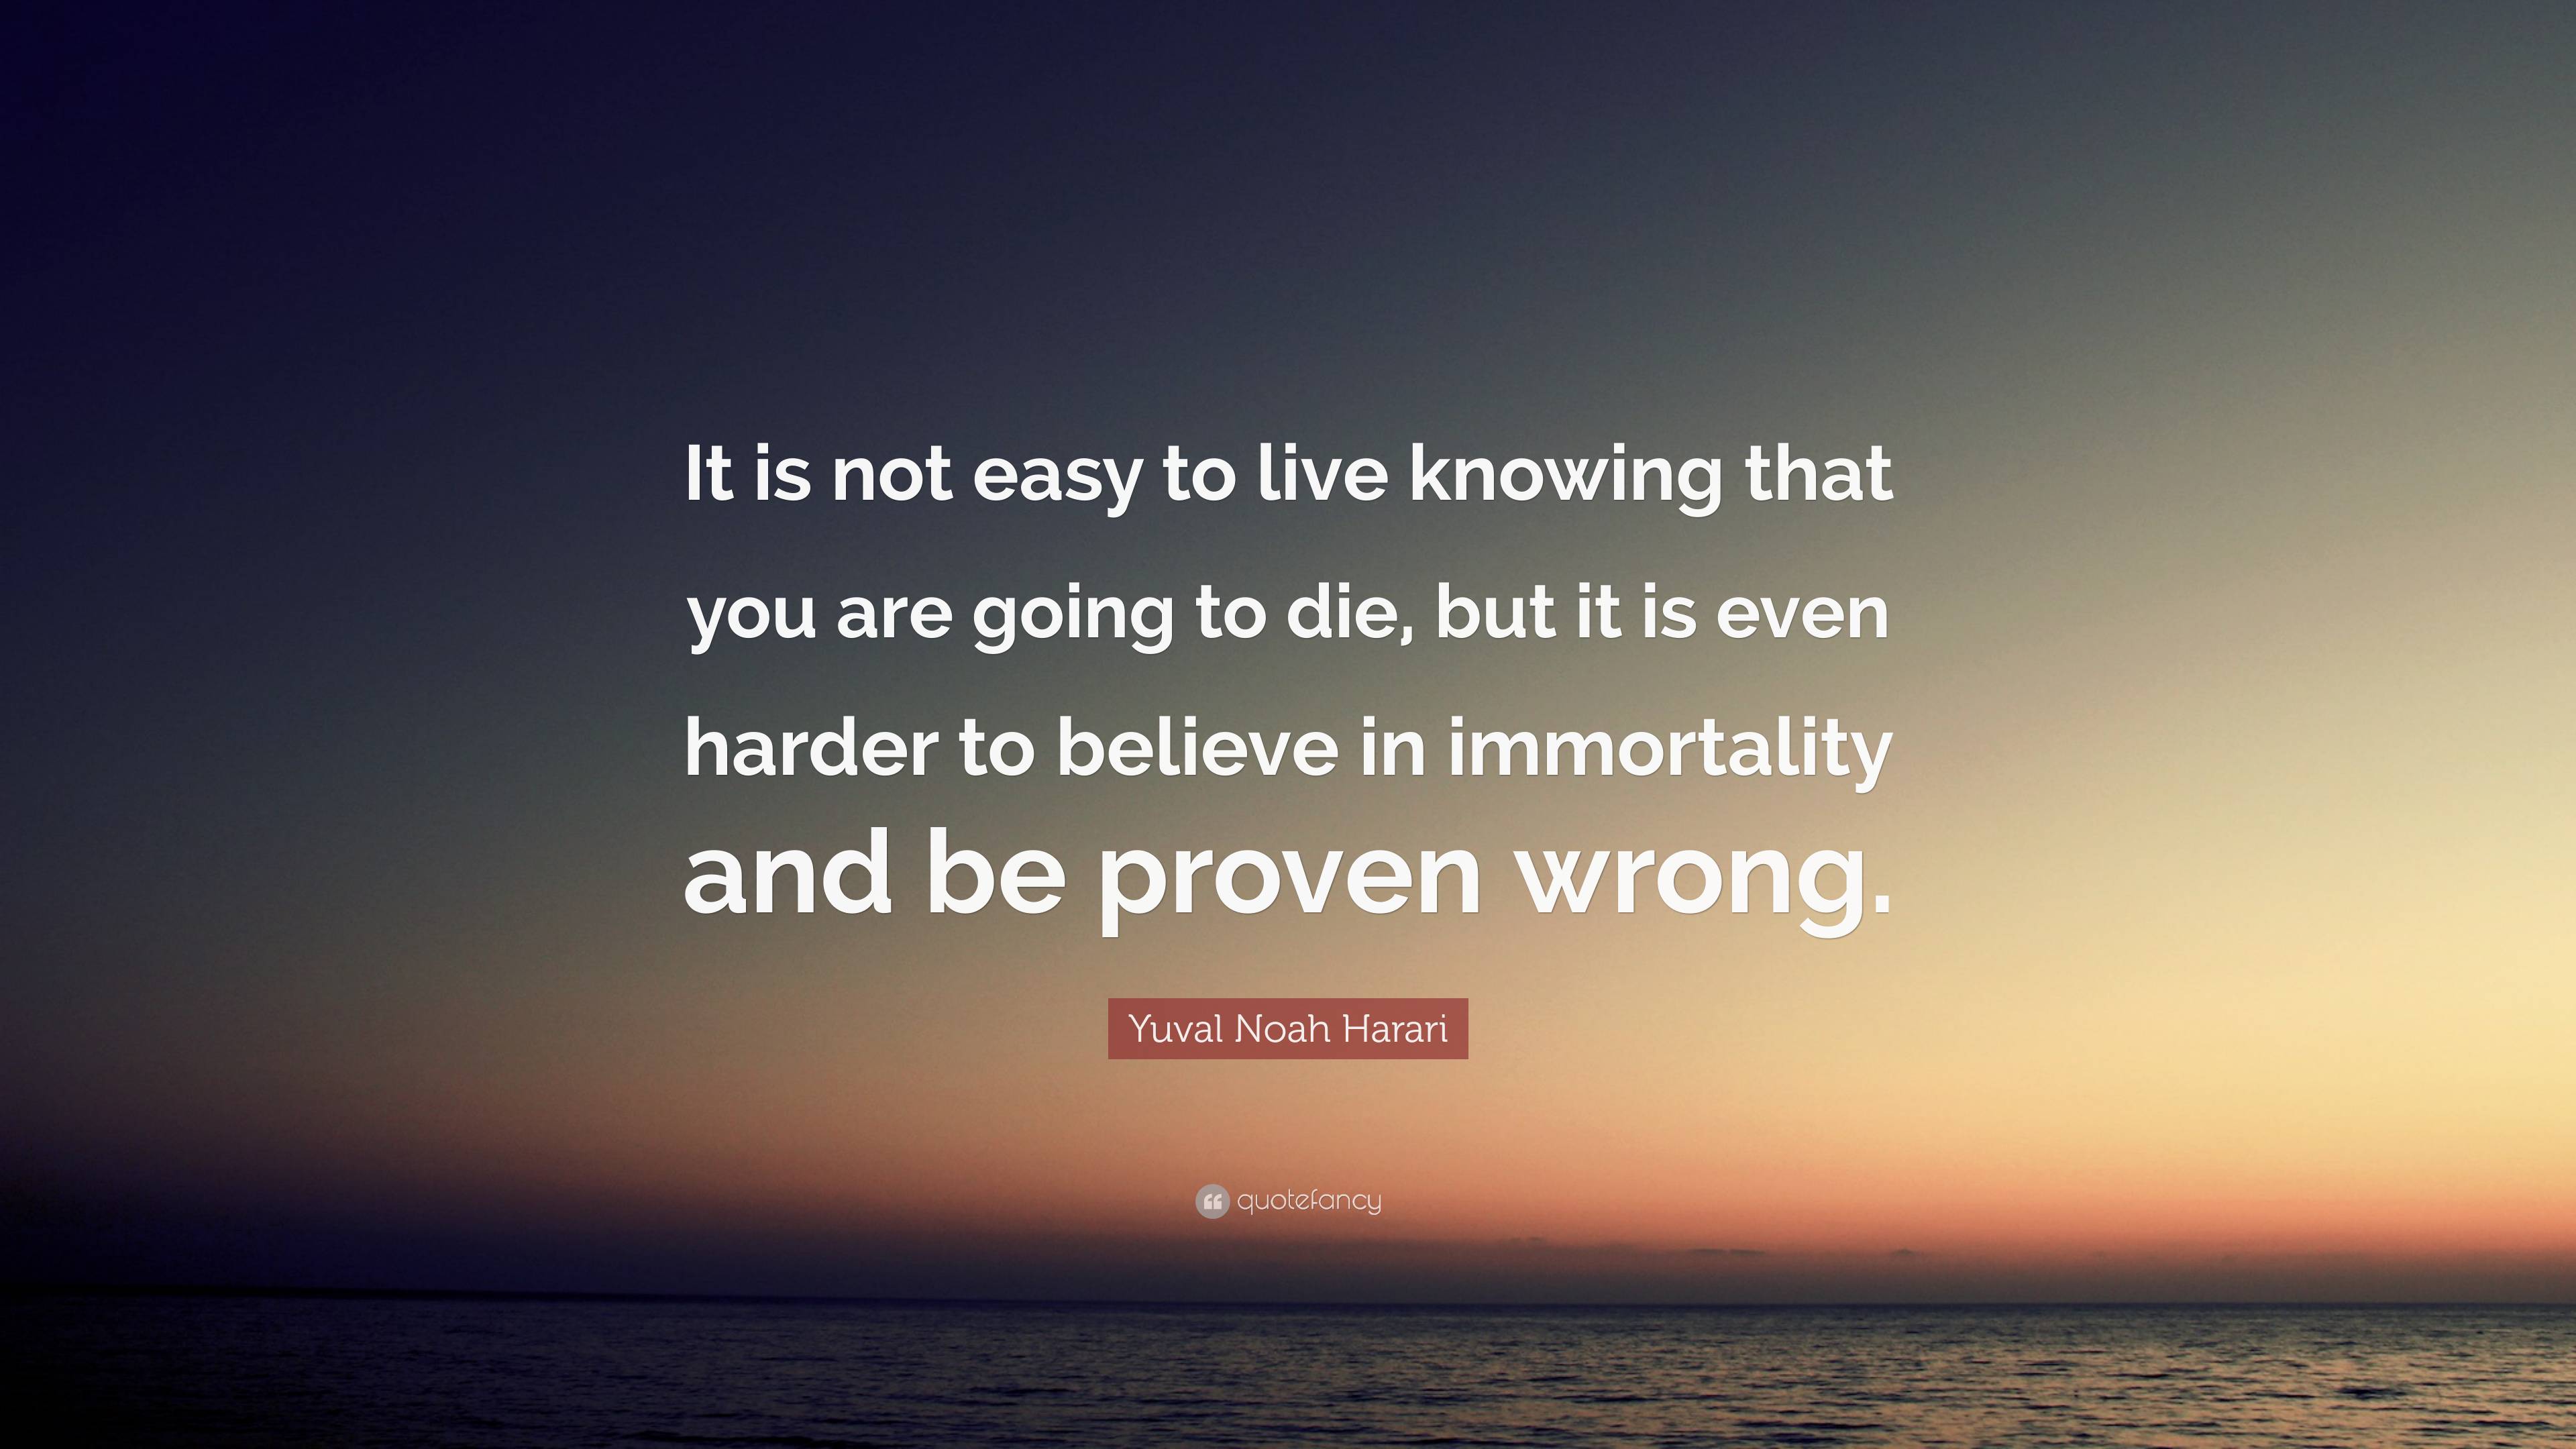 Yuval Noah Harari Quote: “It is not easy to live knowing that you are ...